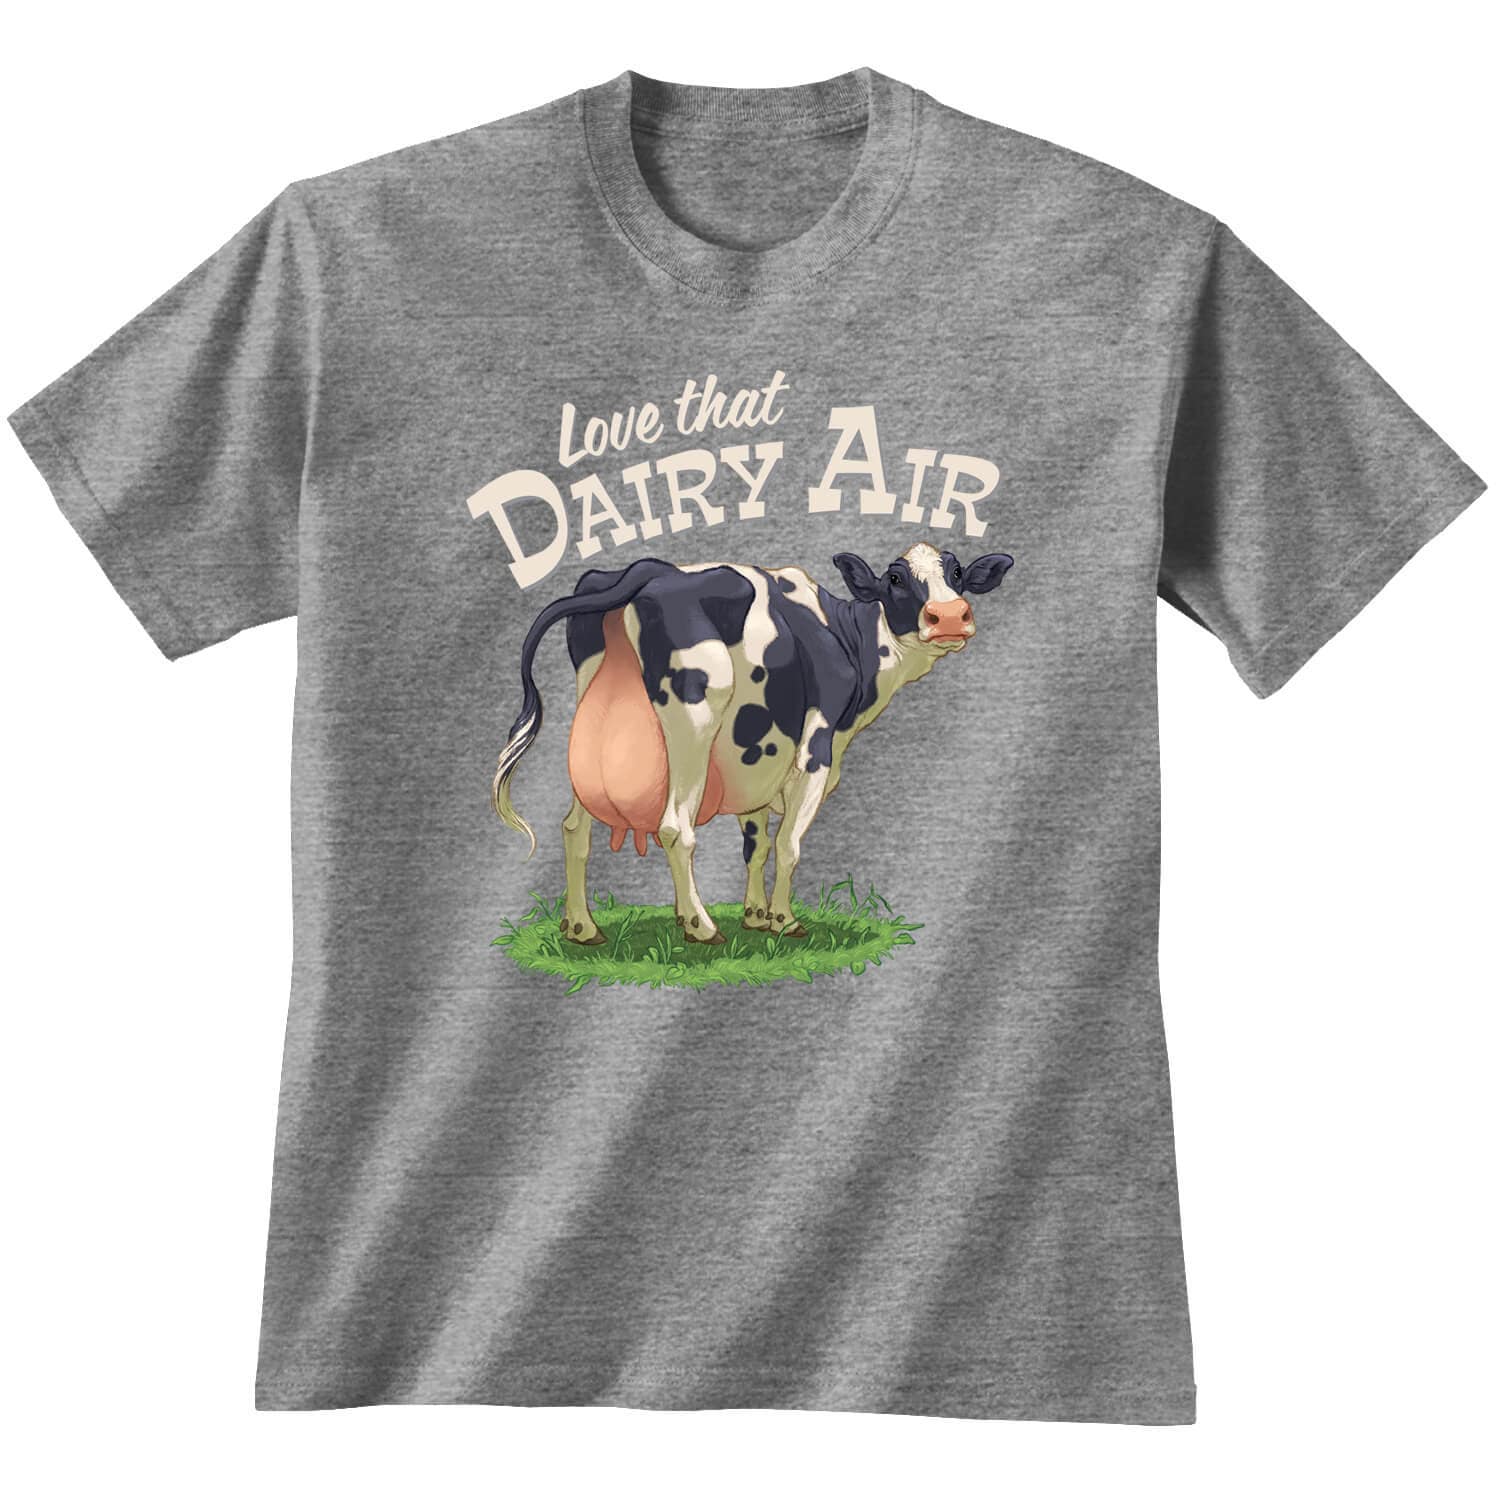 Dairy Air Cow Graphic Tee Funny Animal Shirt - Etsy